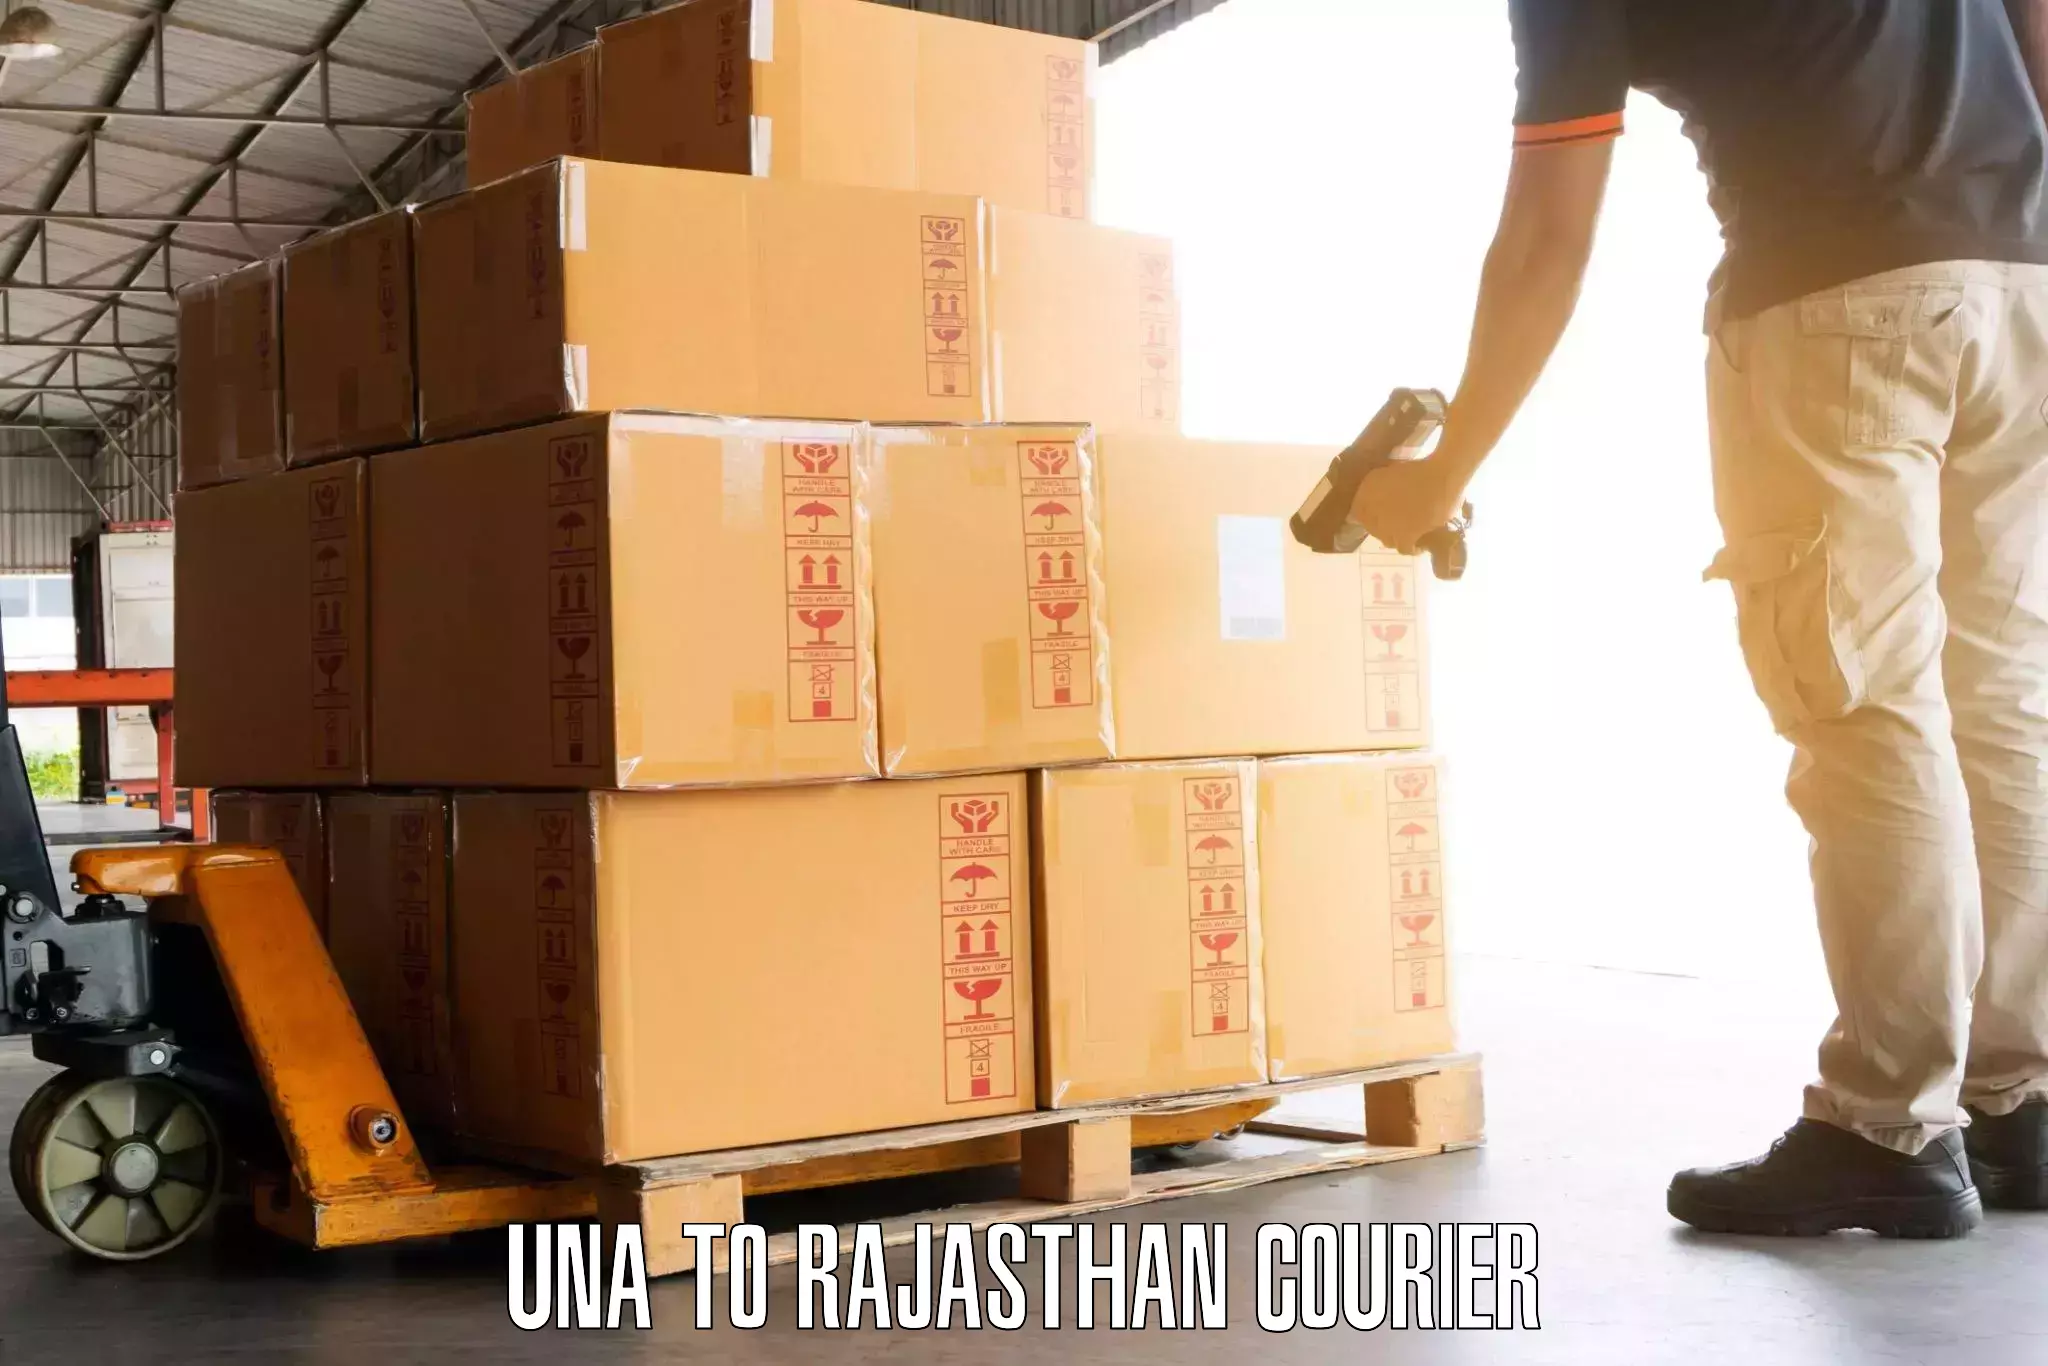 Luggage shipment specialists Una to Rajasthan